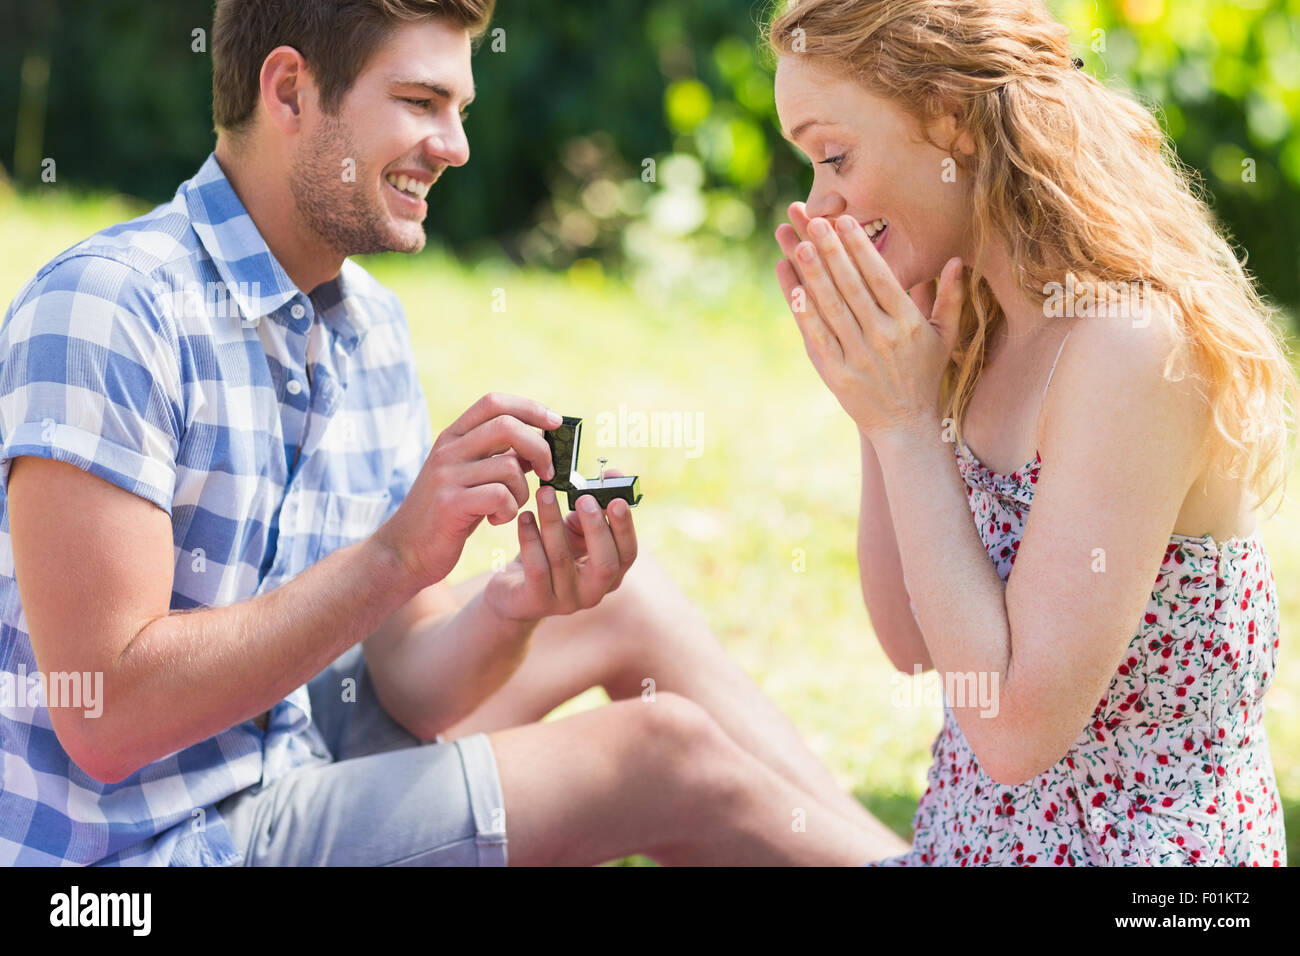 Young man propose to girlfriend Stock Photo